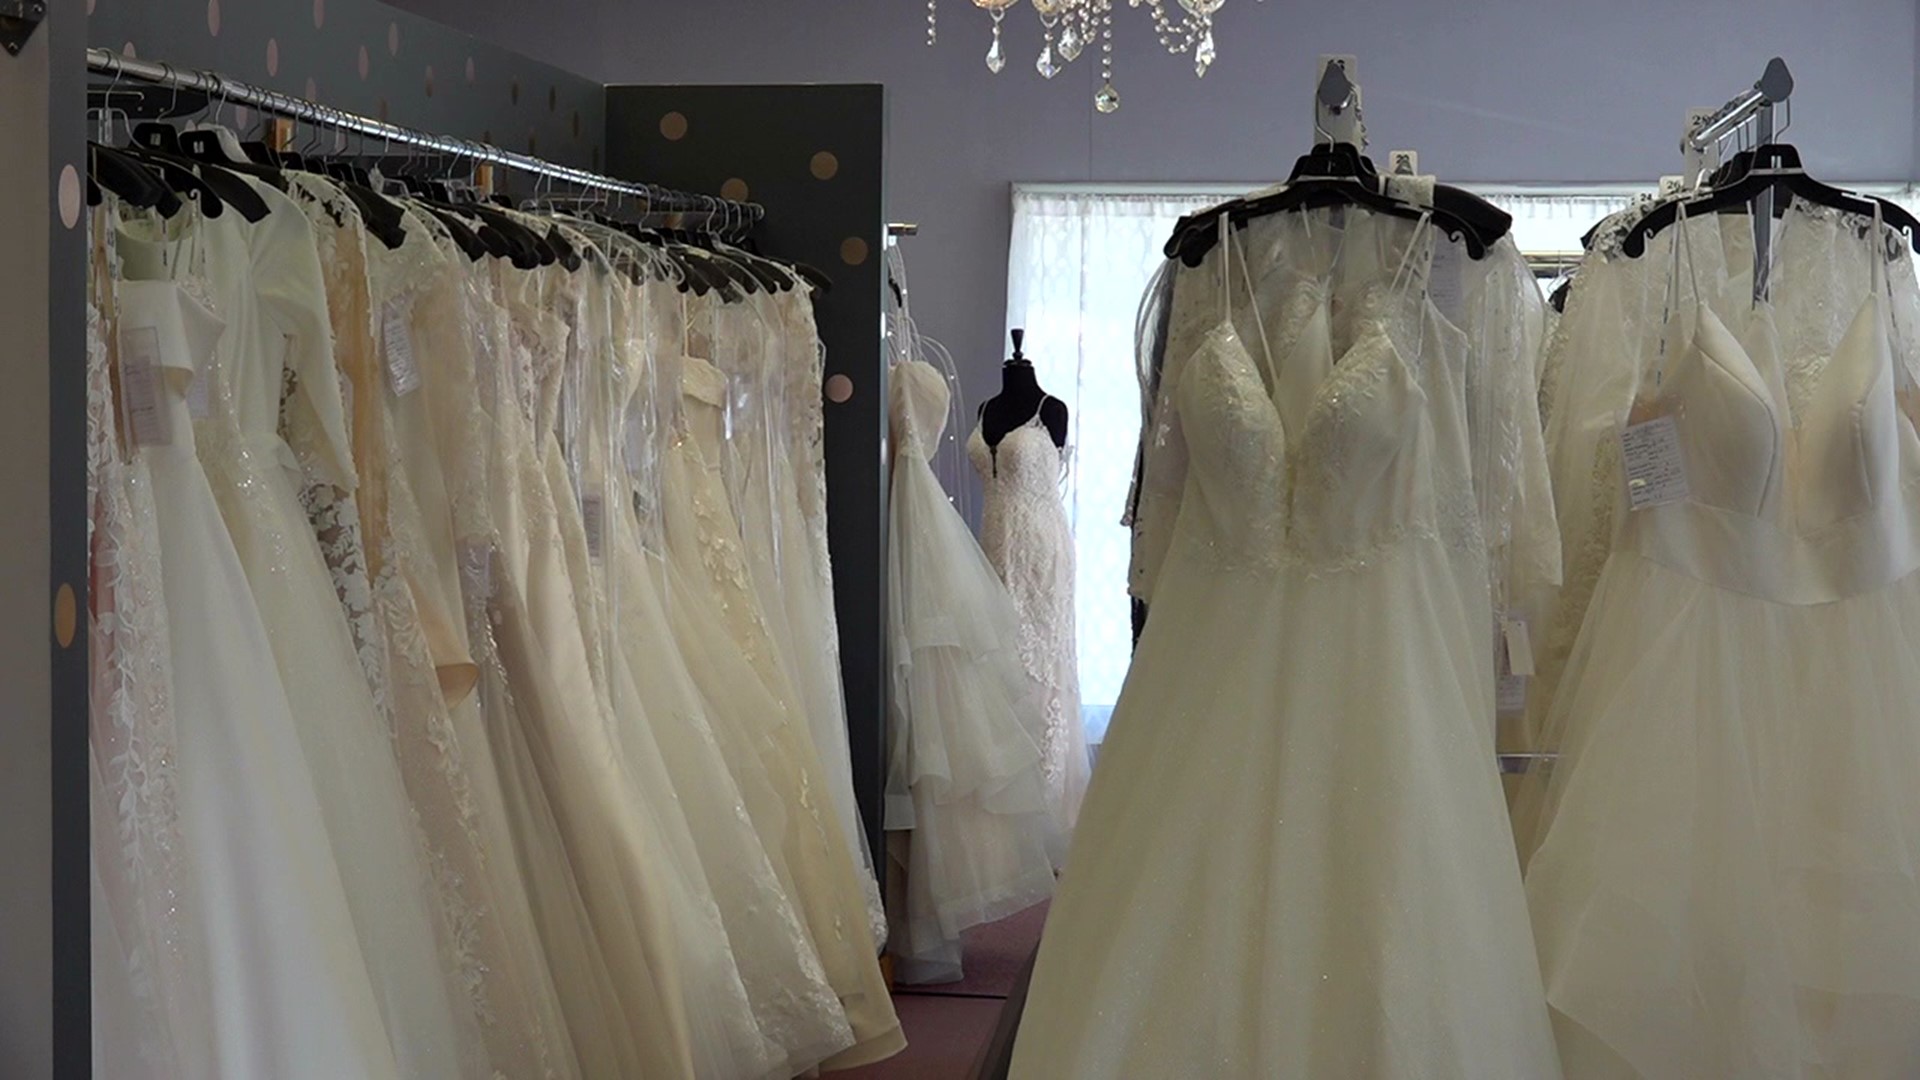 The search for a new owner of a bridal shop in Schuylkill County is over, thanks to the help of Newswatch 16.